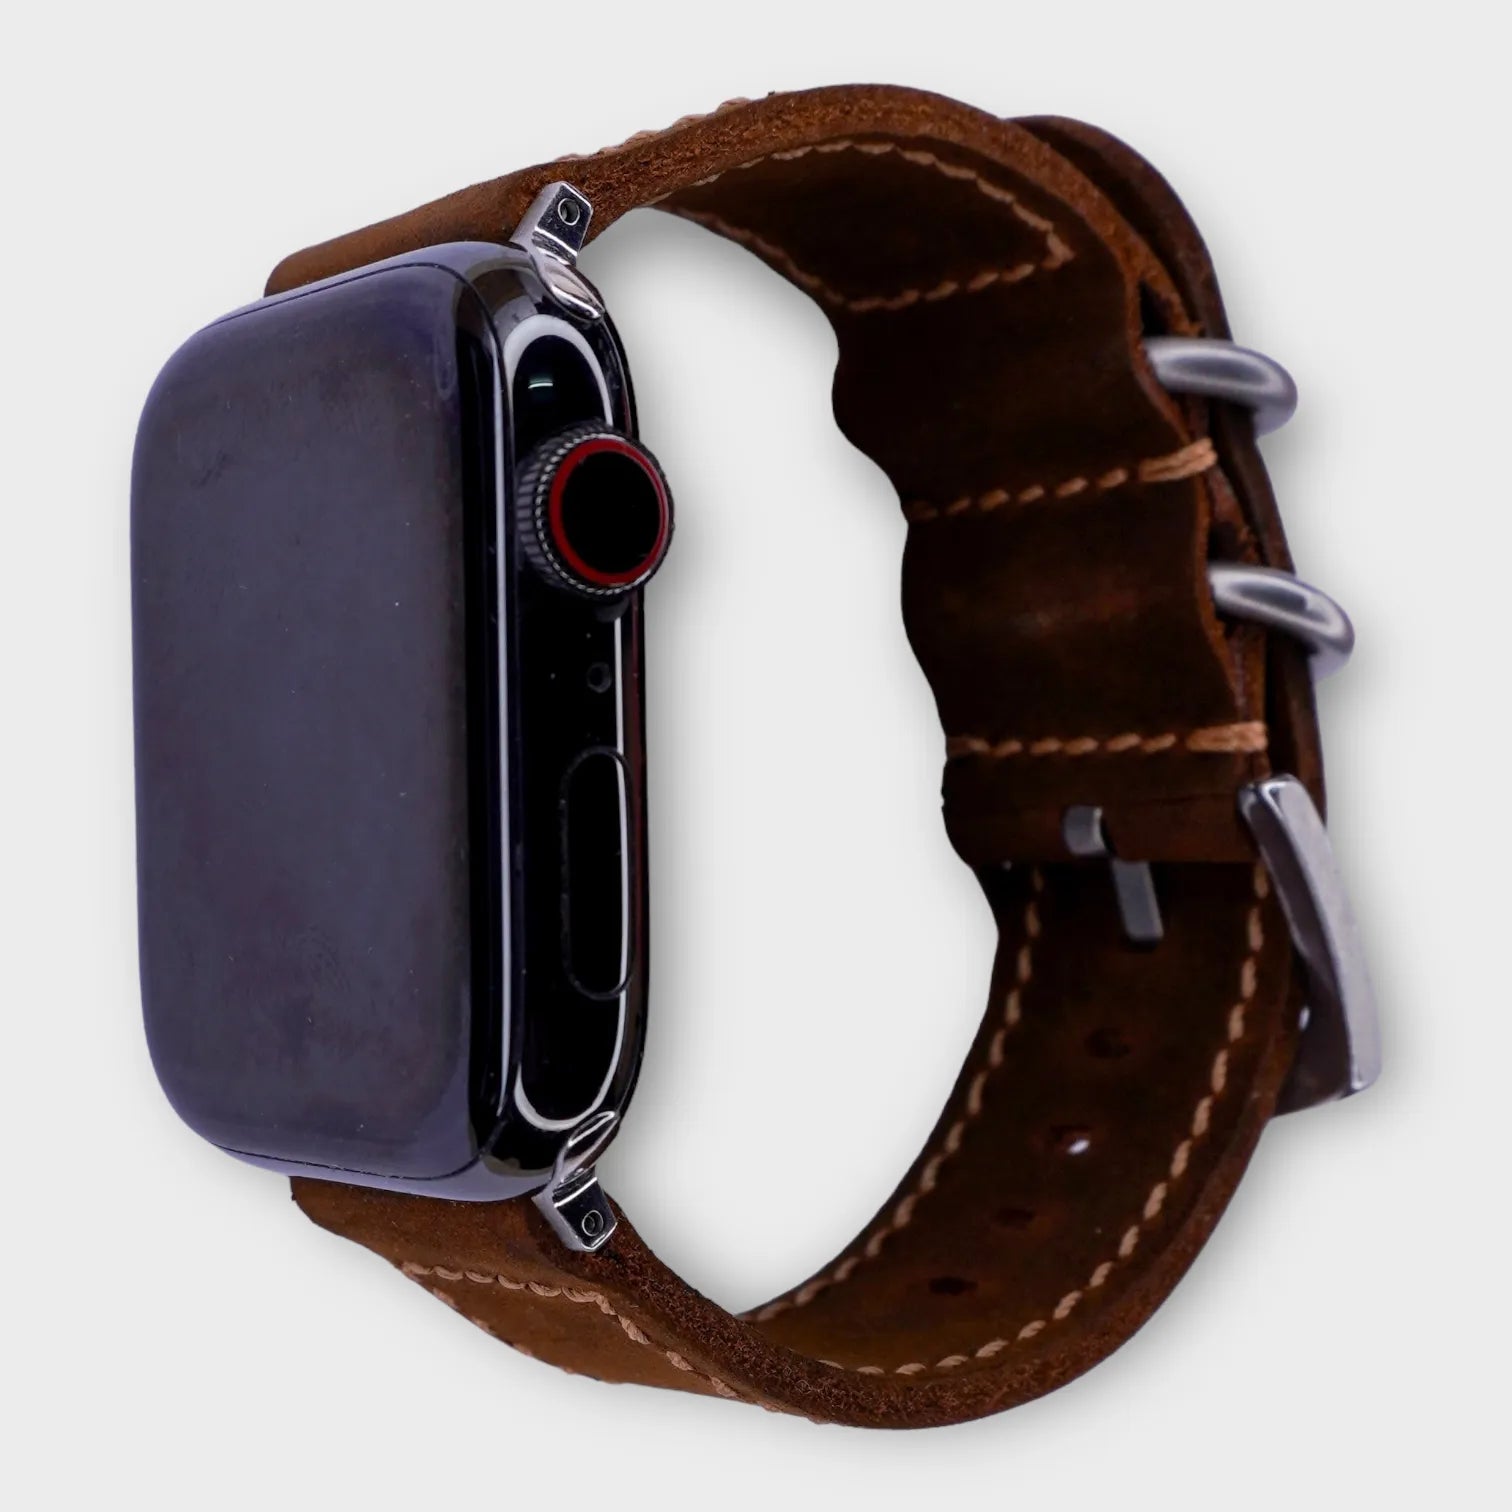 Sophisticated leather Apple Watch band crafted from dark brown waxy leather.